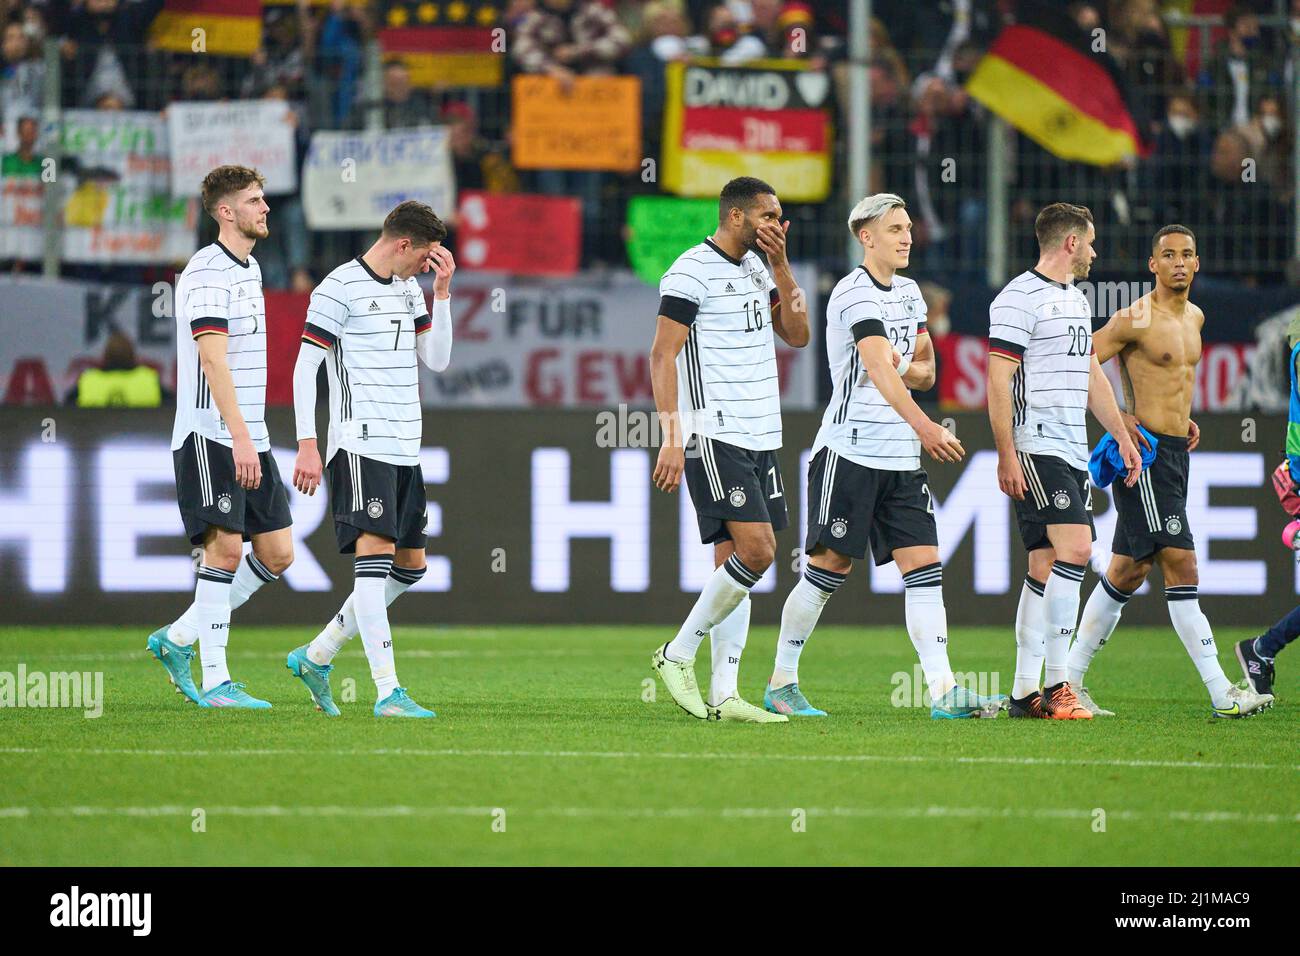 DFB Team sad after the match in the friendly match GERMANY - ISRAEL Preparation for World Championships 2022 in Qatar ,Season 2021/2022, on Mar 26, 2022  in Sinsheim, Germany.  © Peter Schatz / Alamy Live News Stock Photo